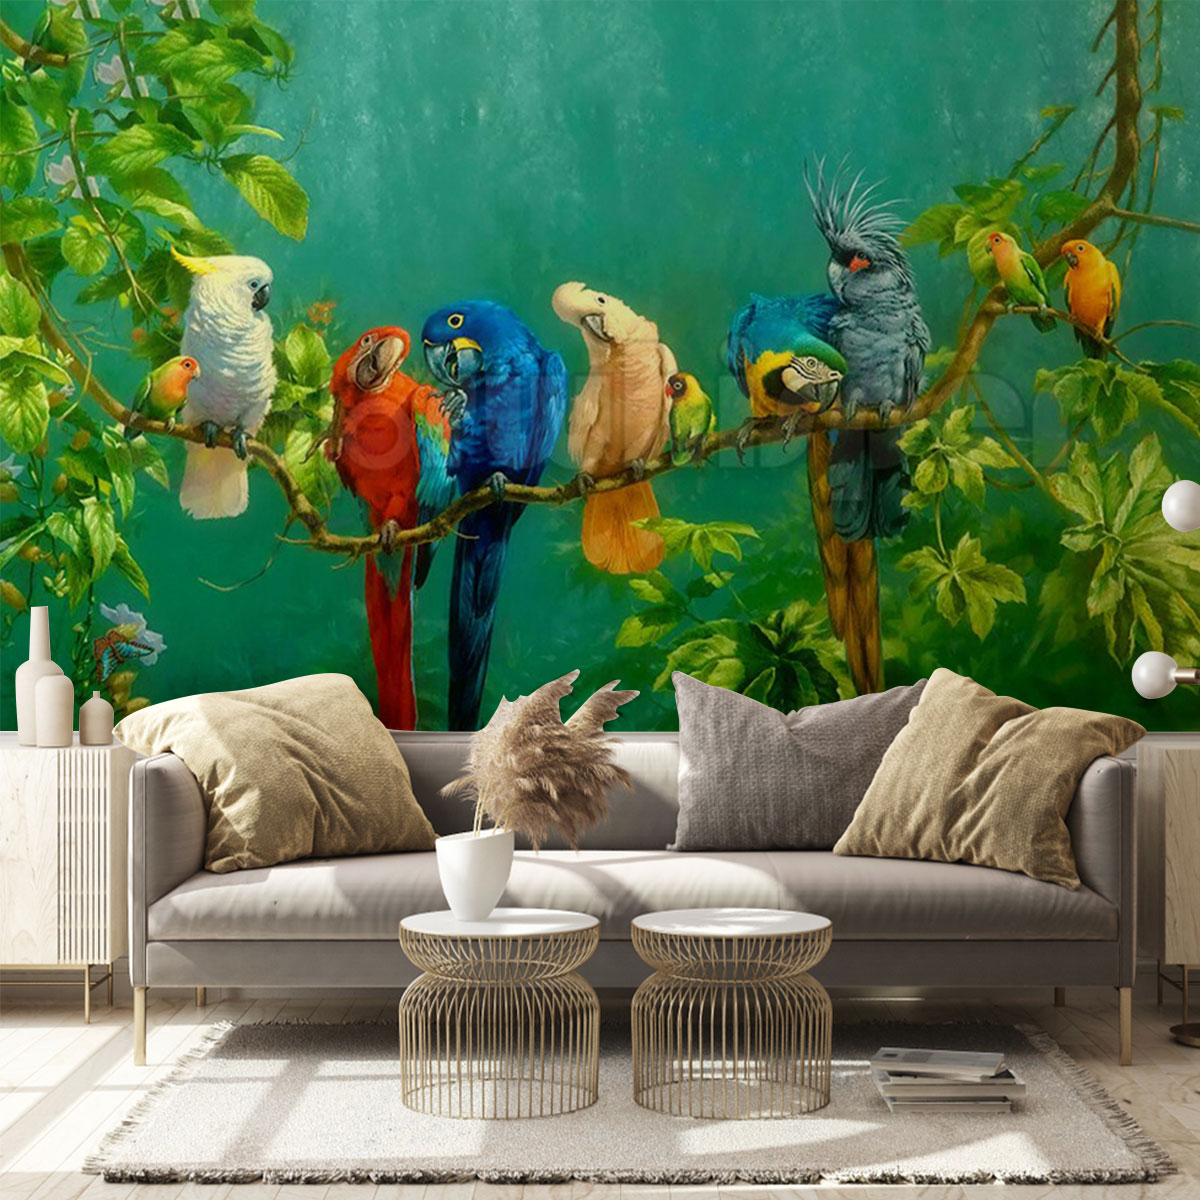 Colorful Parrot Bird Wall Mural